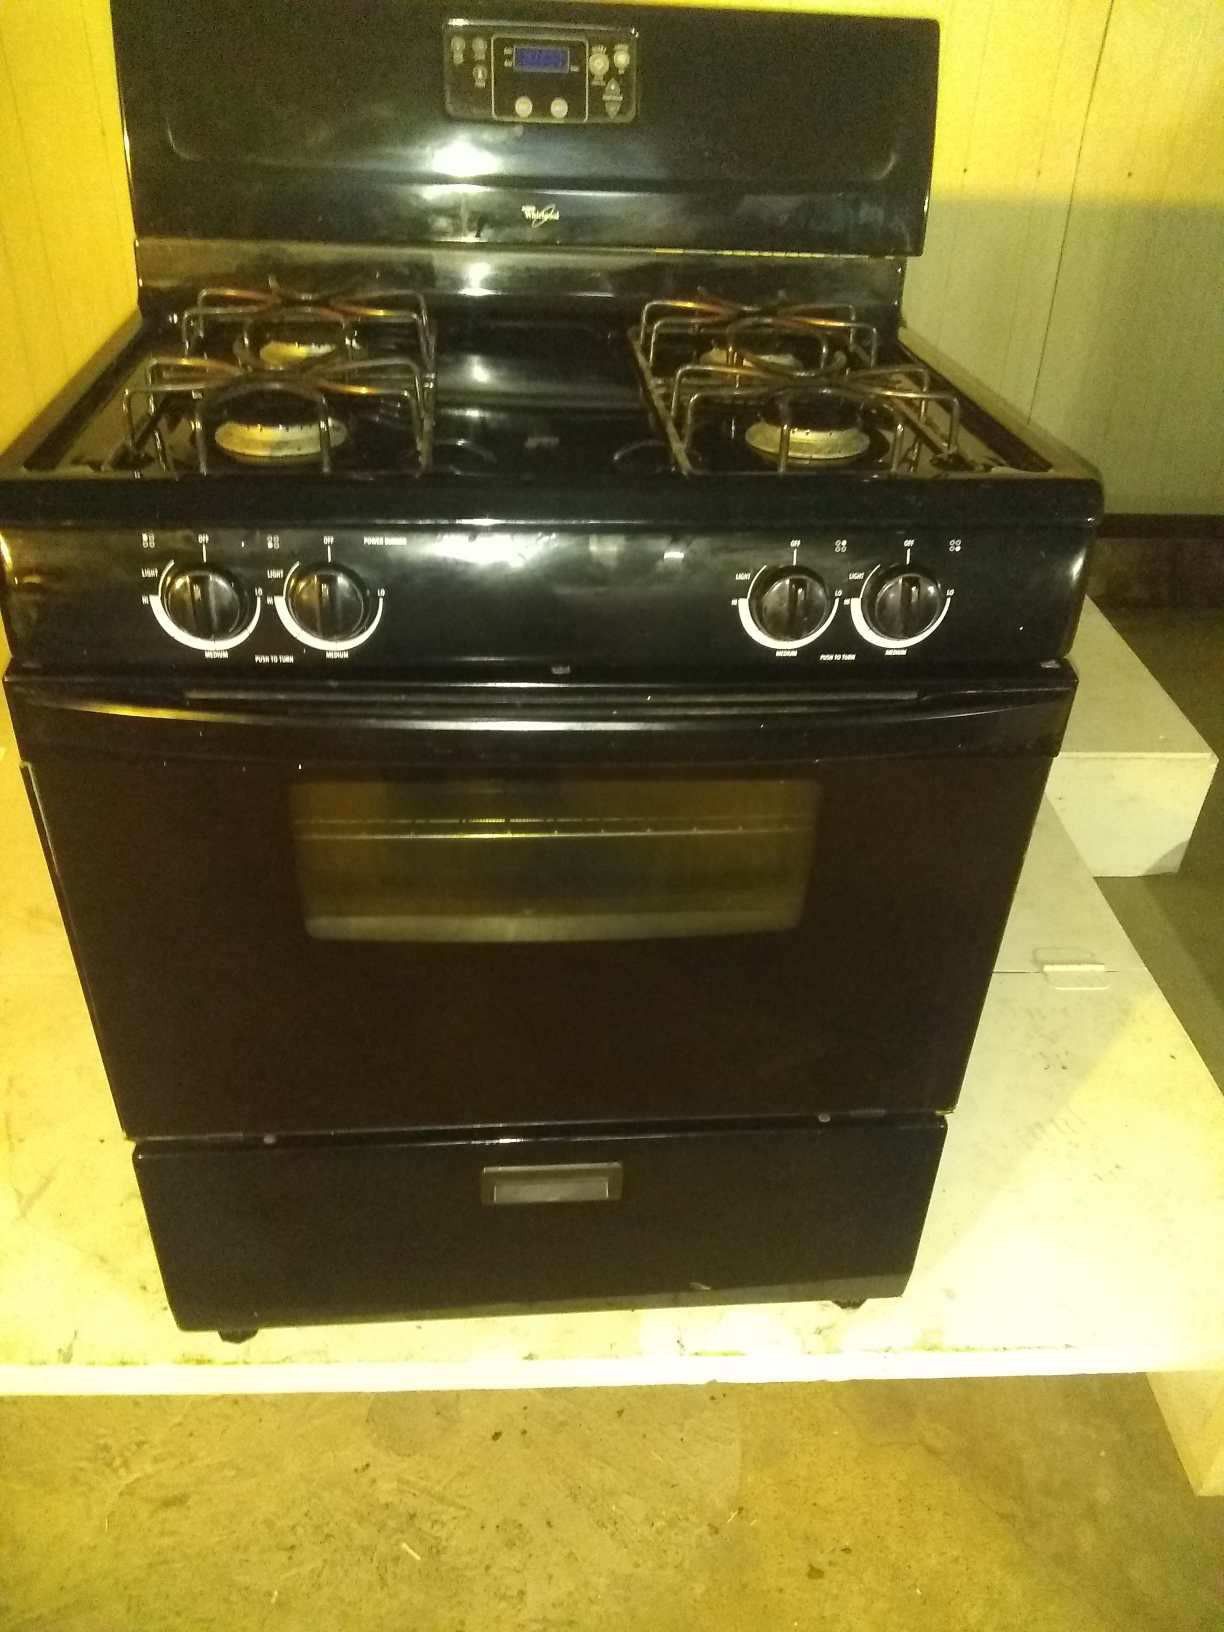 General Electric gas stove four burners